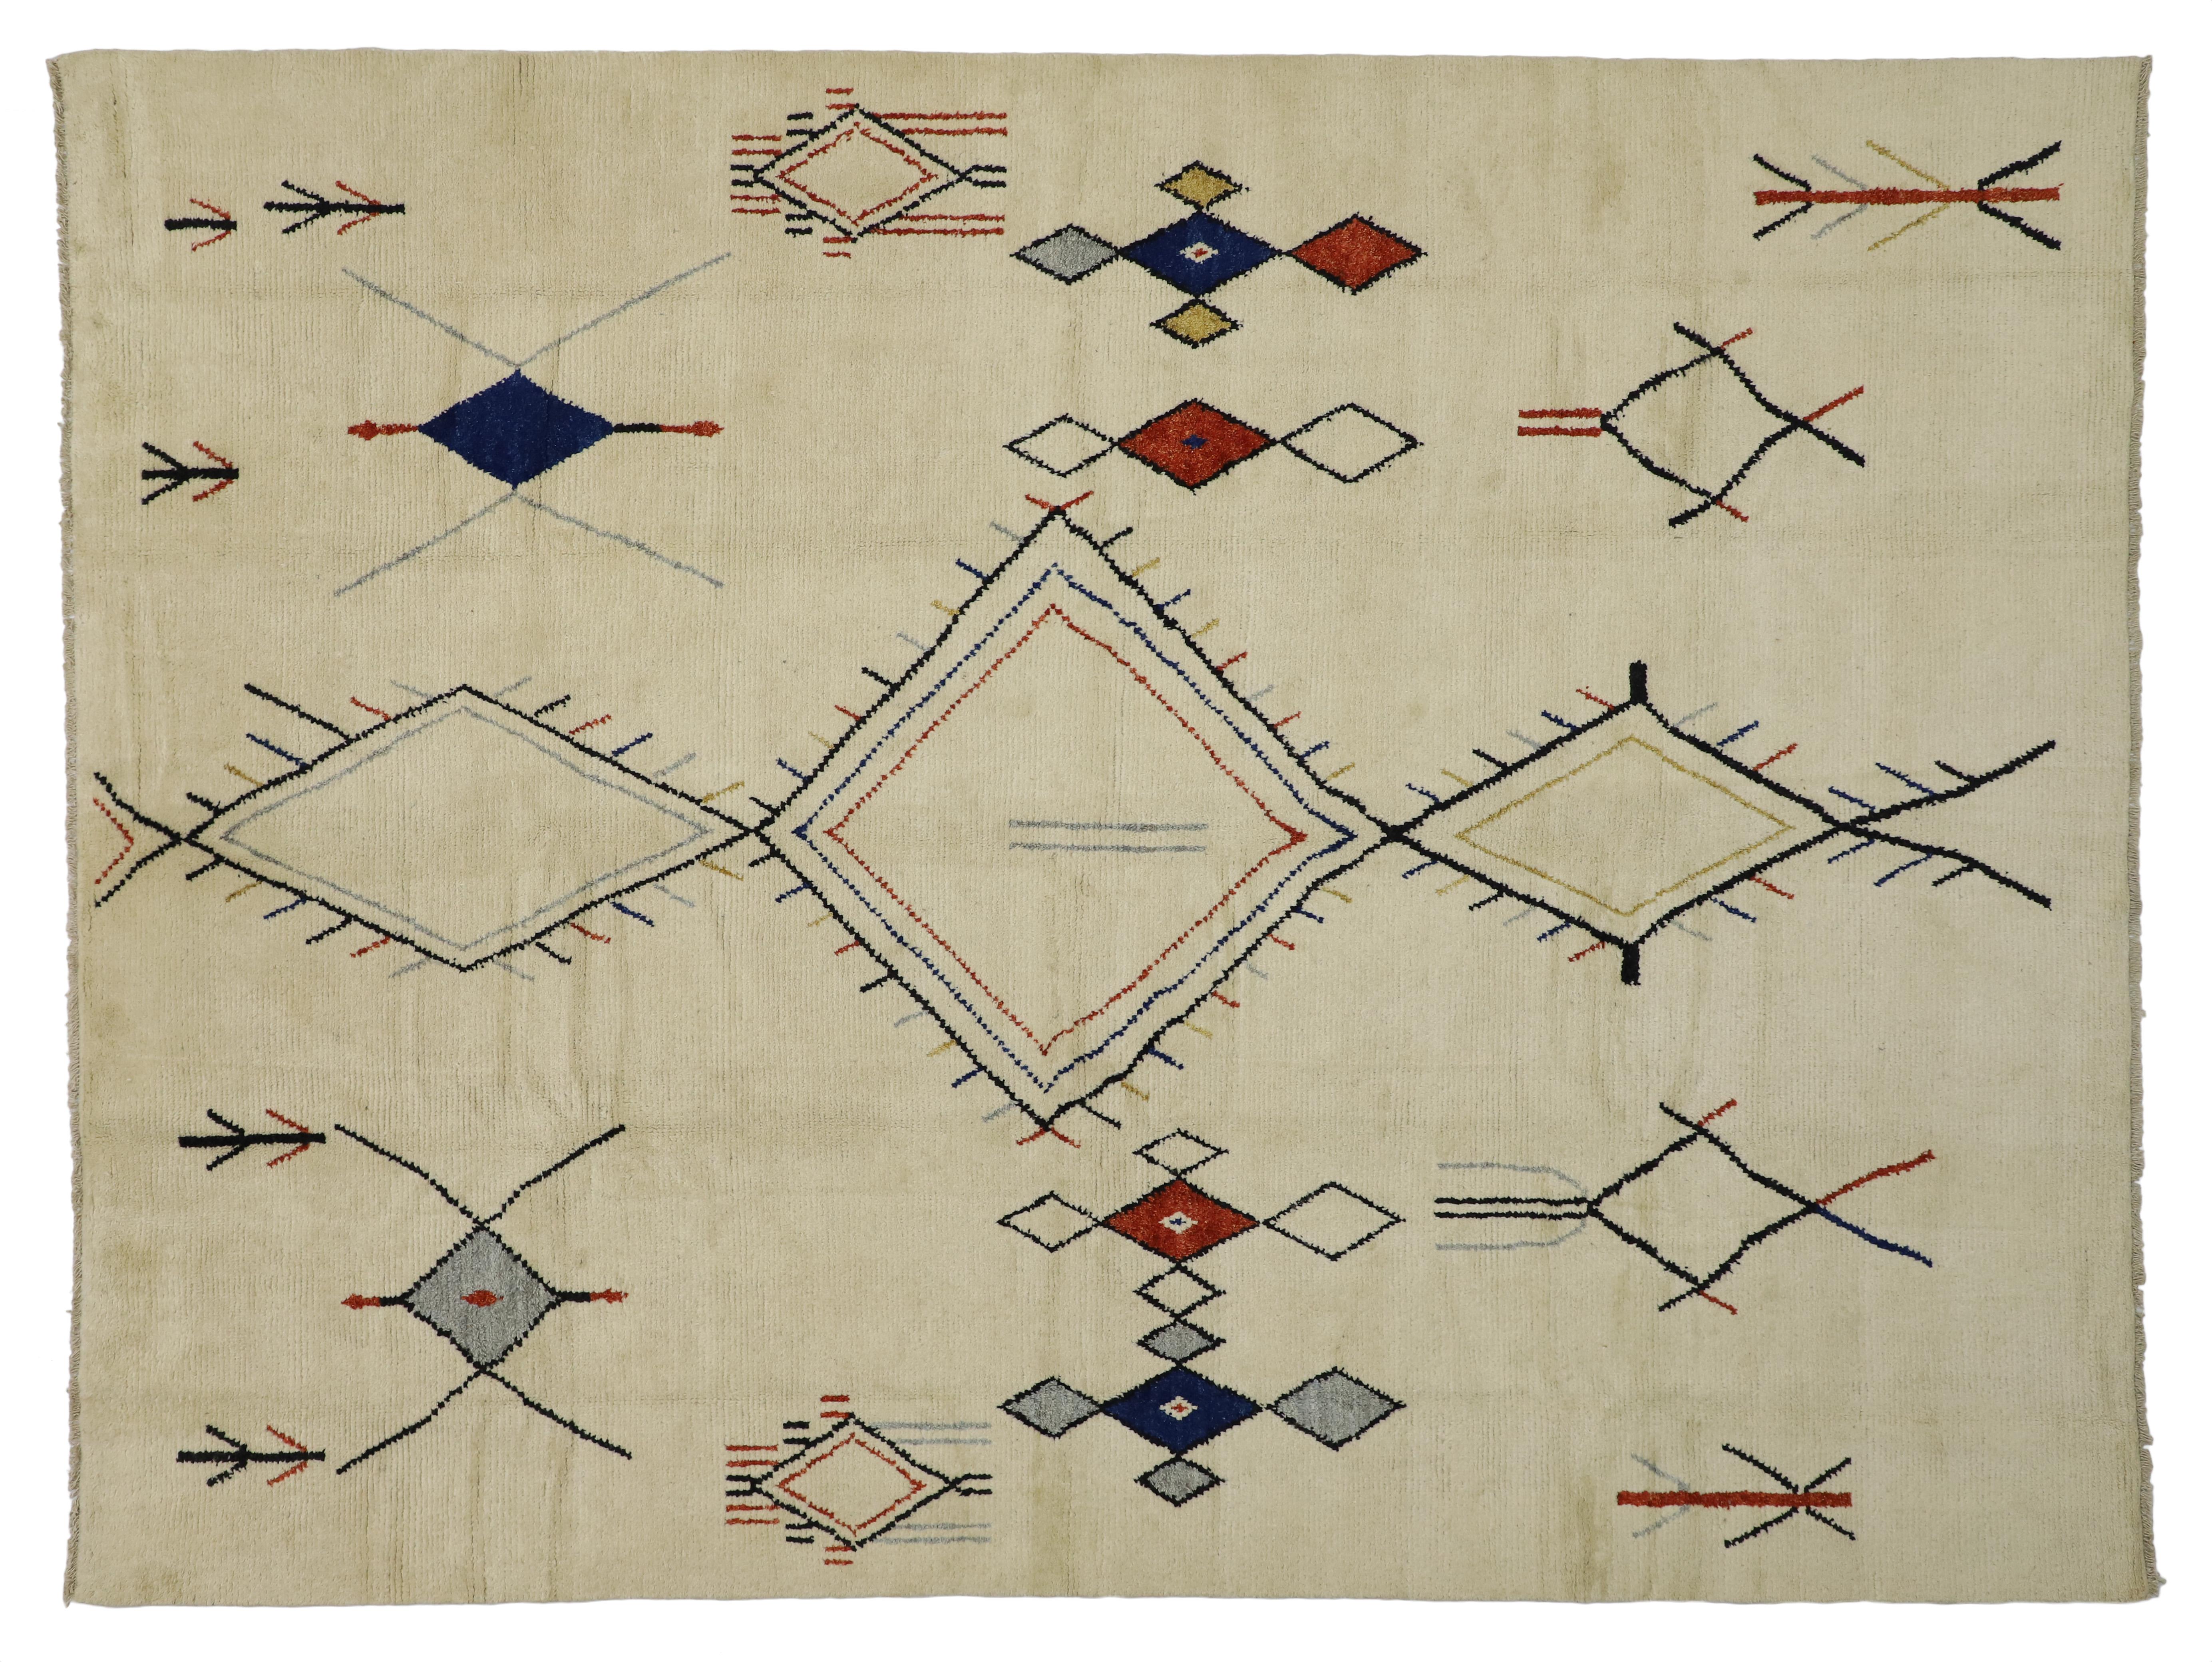 New Contemporary Moroccan Area Rug with Adirondack and Nomadic Tribal Style 1